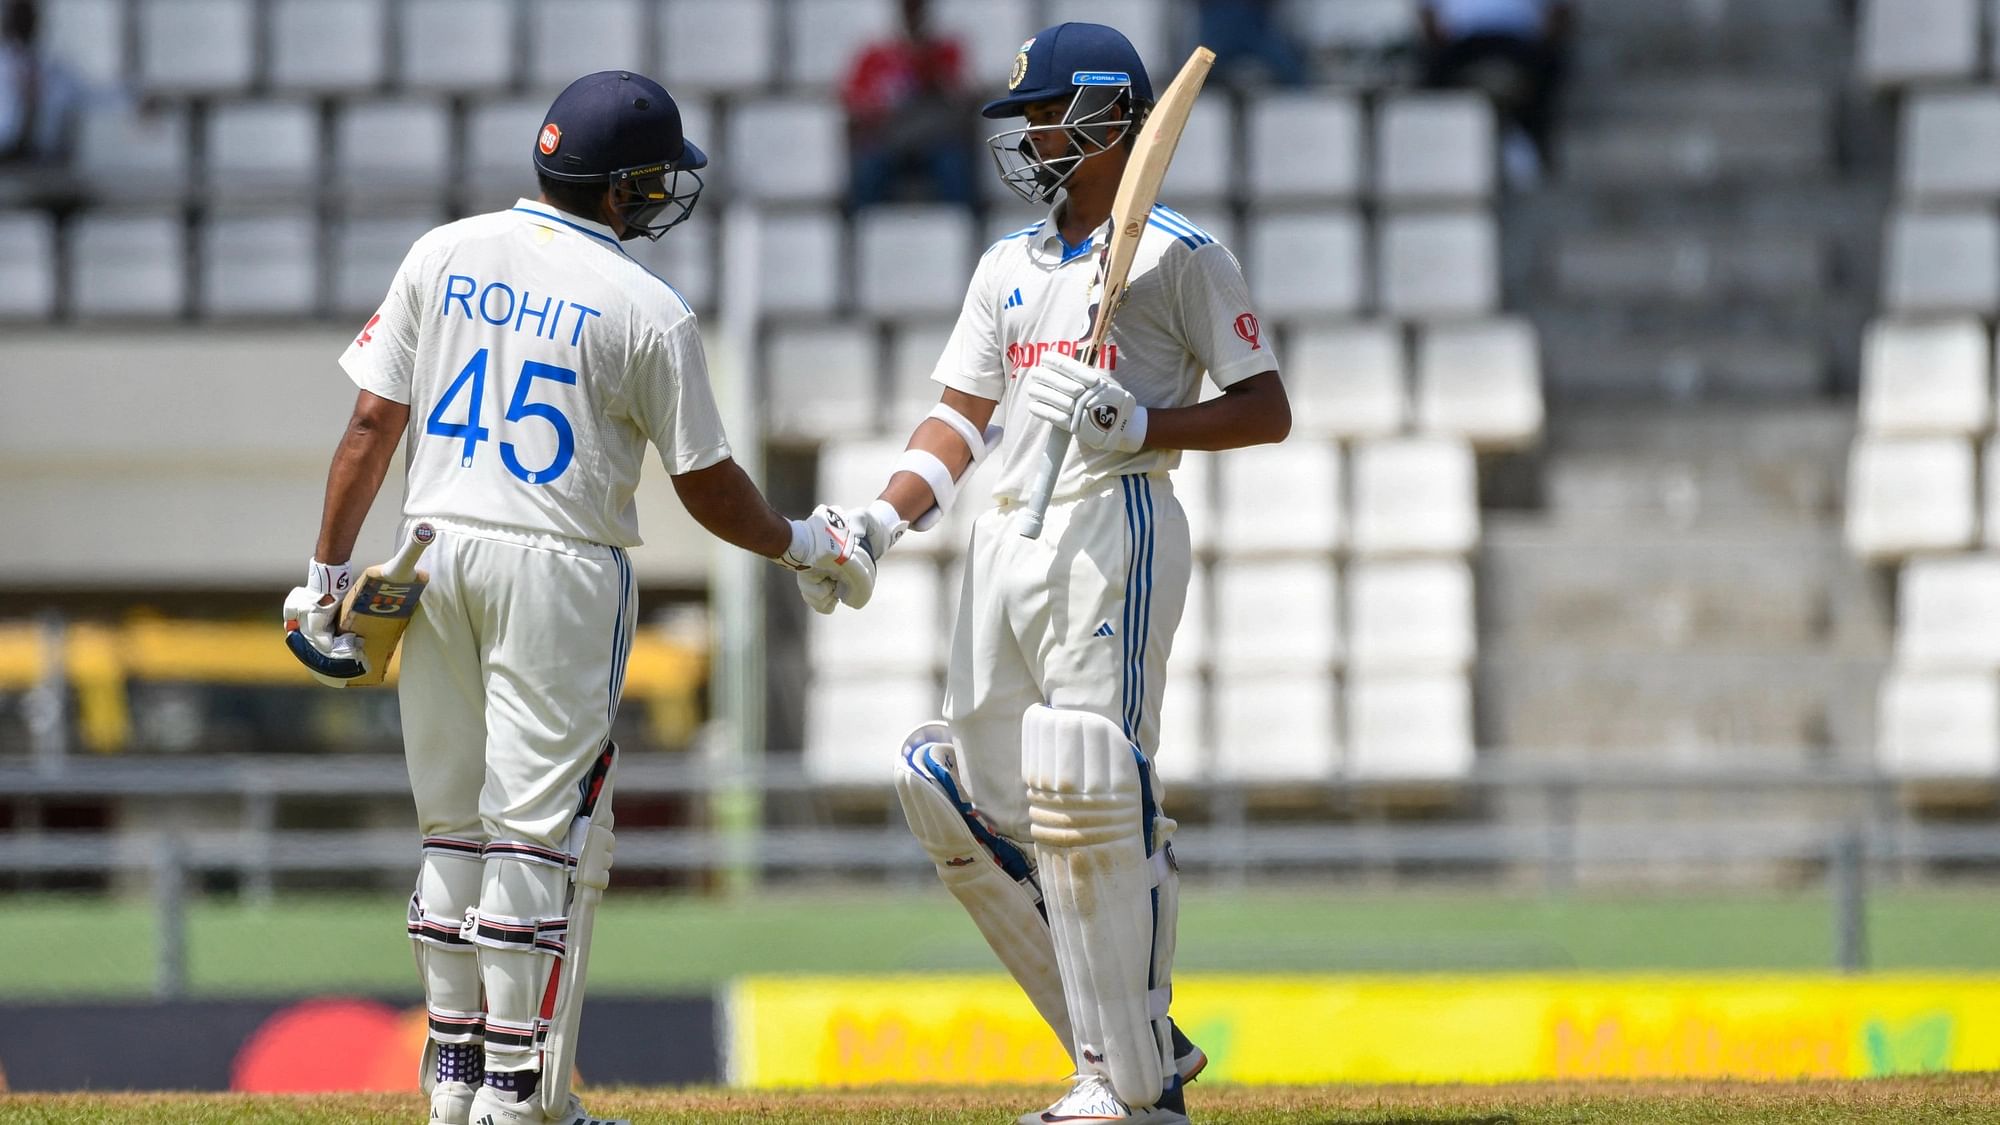 India vs West Indies, 2nd Test Rohit, Jaiswal Score Fifties as India Assert Dominance